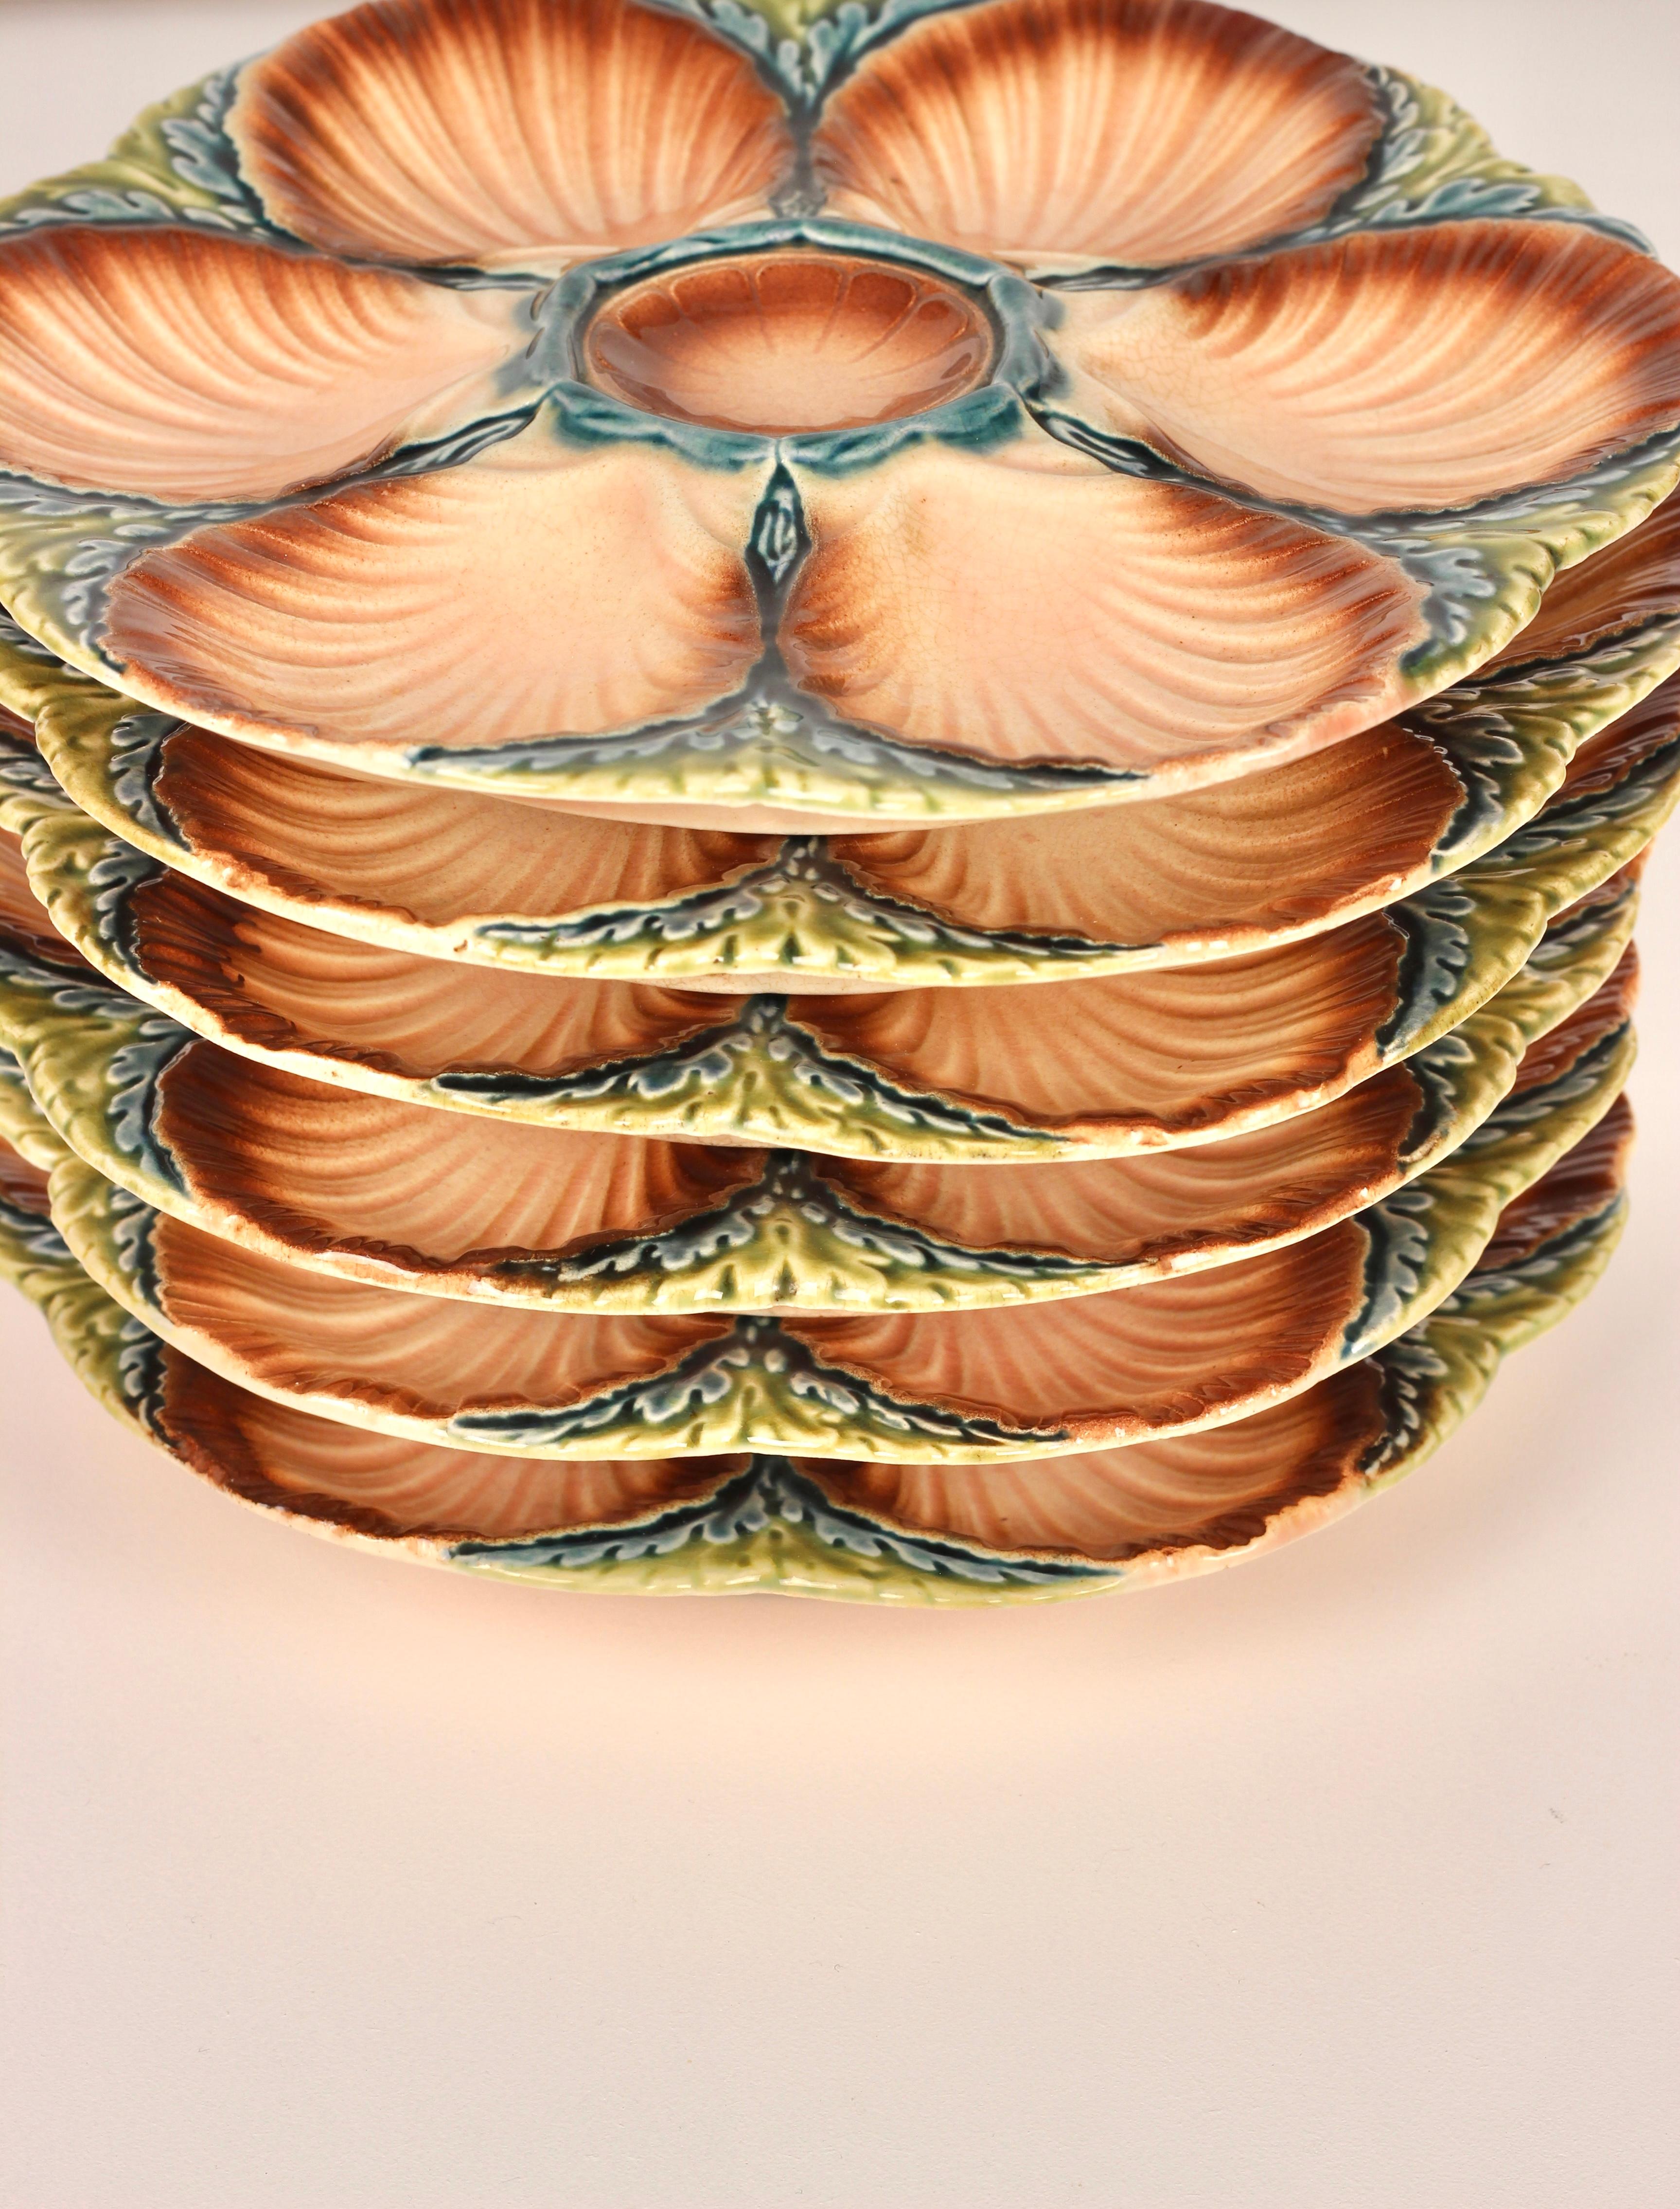 Late 19th Century 19th Century Sarreguemines Majolica Seaweed and Shell Barbotine Oyster Plate For Sale